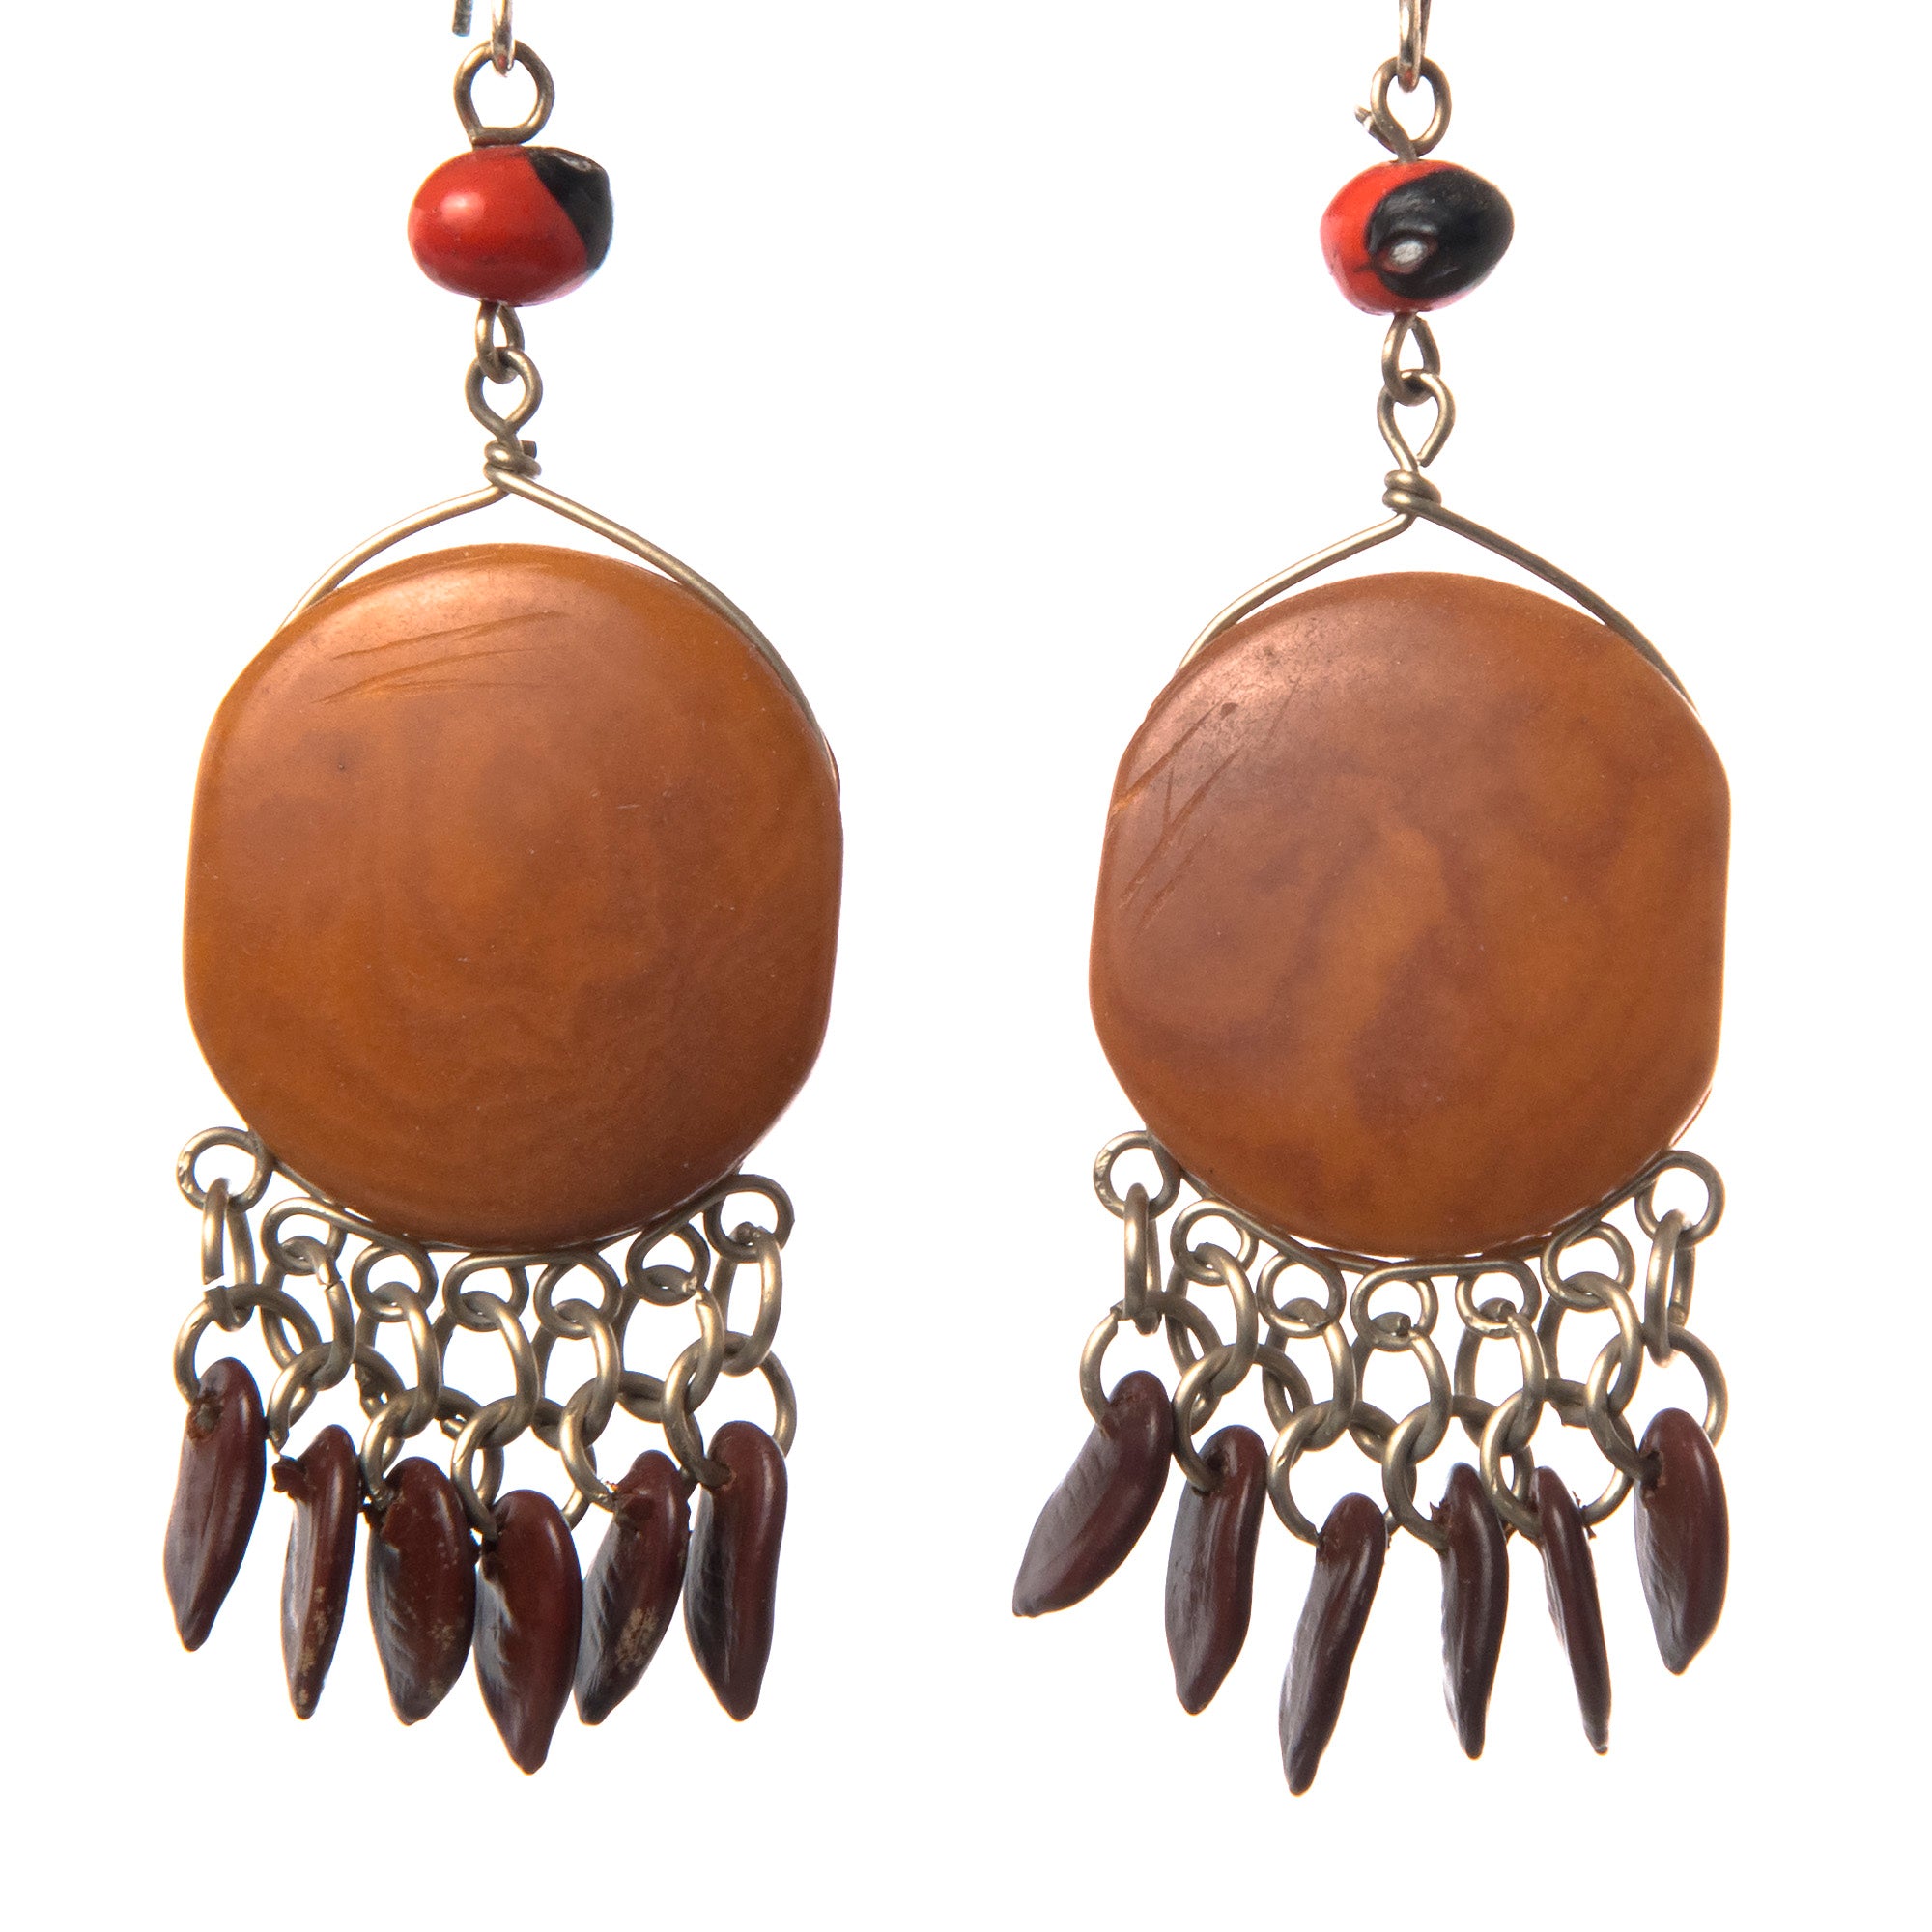 Tagua Palm Nut Disk Earrings with Watermelon Seed Dangles